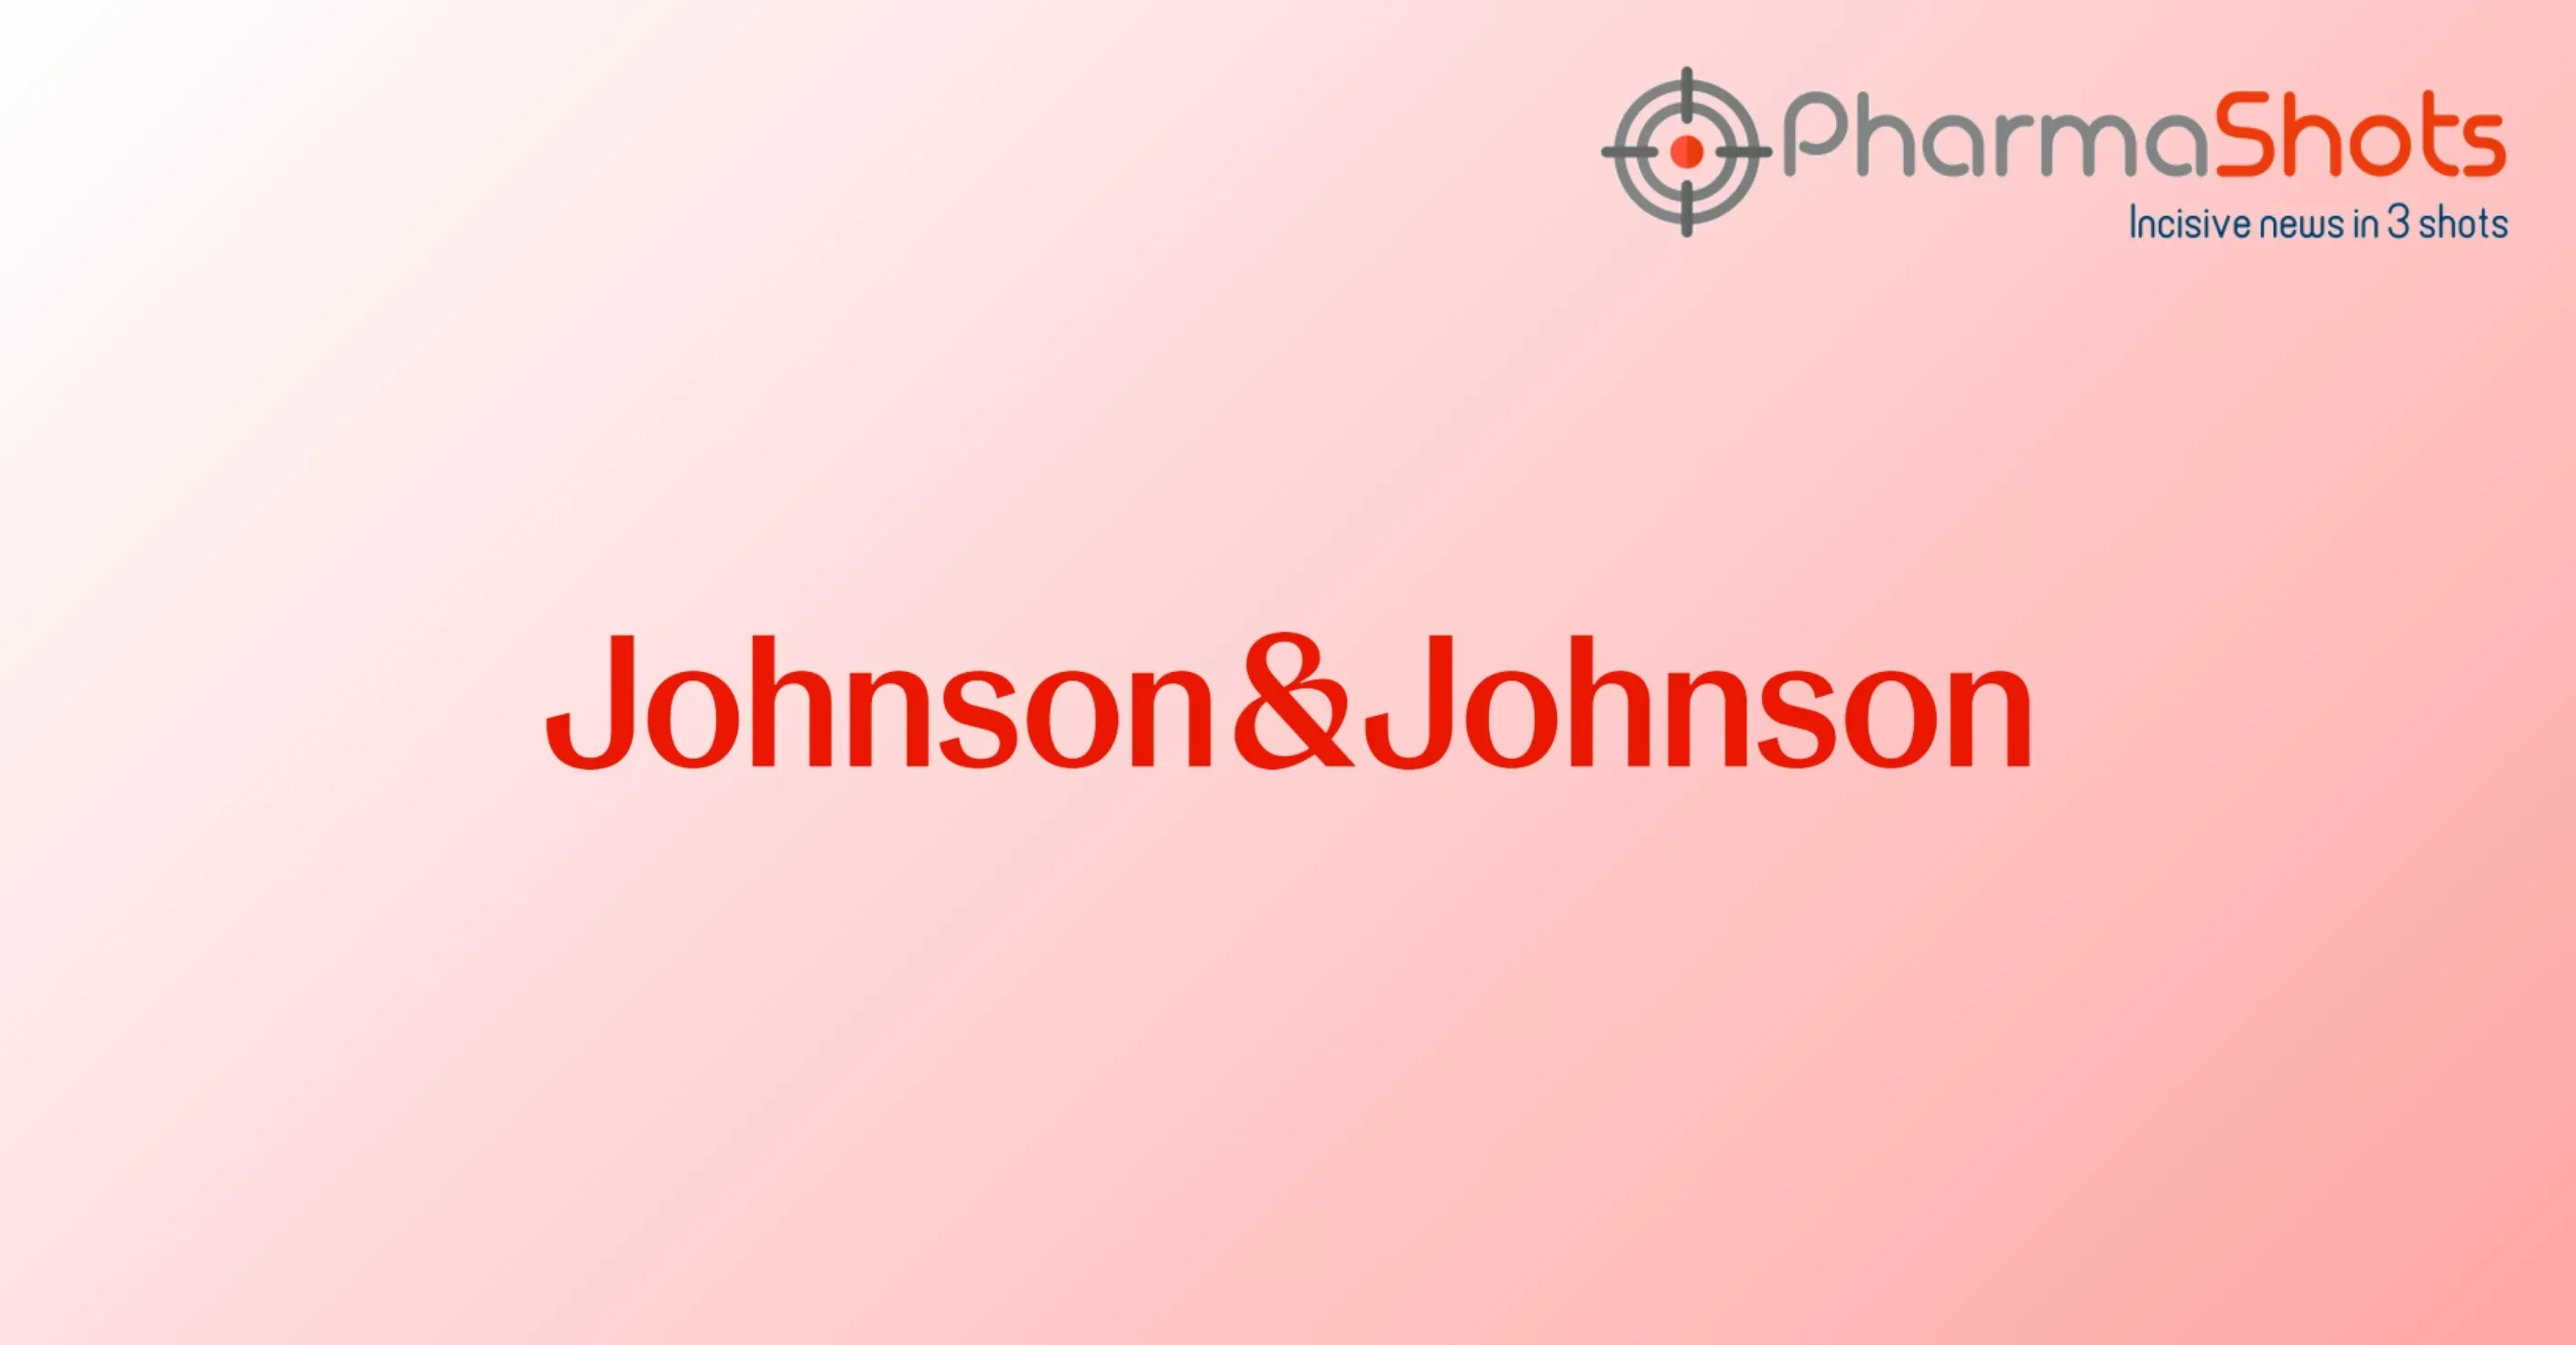 Johnson & Johnson Reports the Results from 2 Trials of Nipocalimab to Treat Generalized Myasthenia Gravis (gMG) and Sjögren’s Disease (SjD)